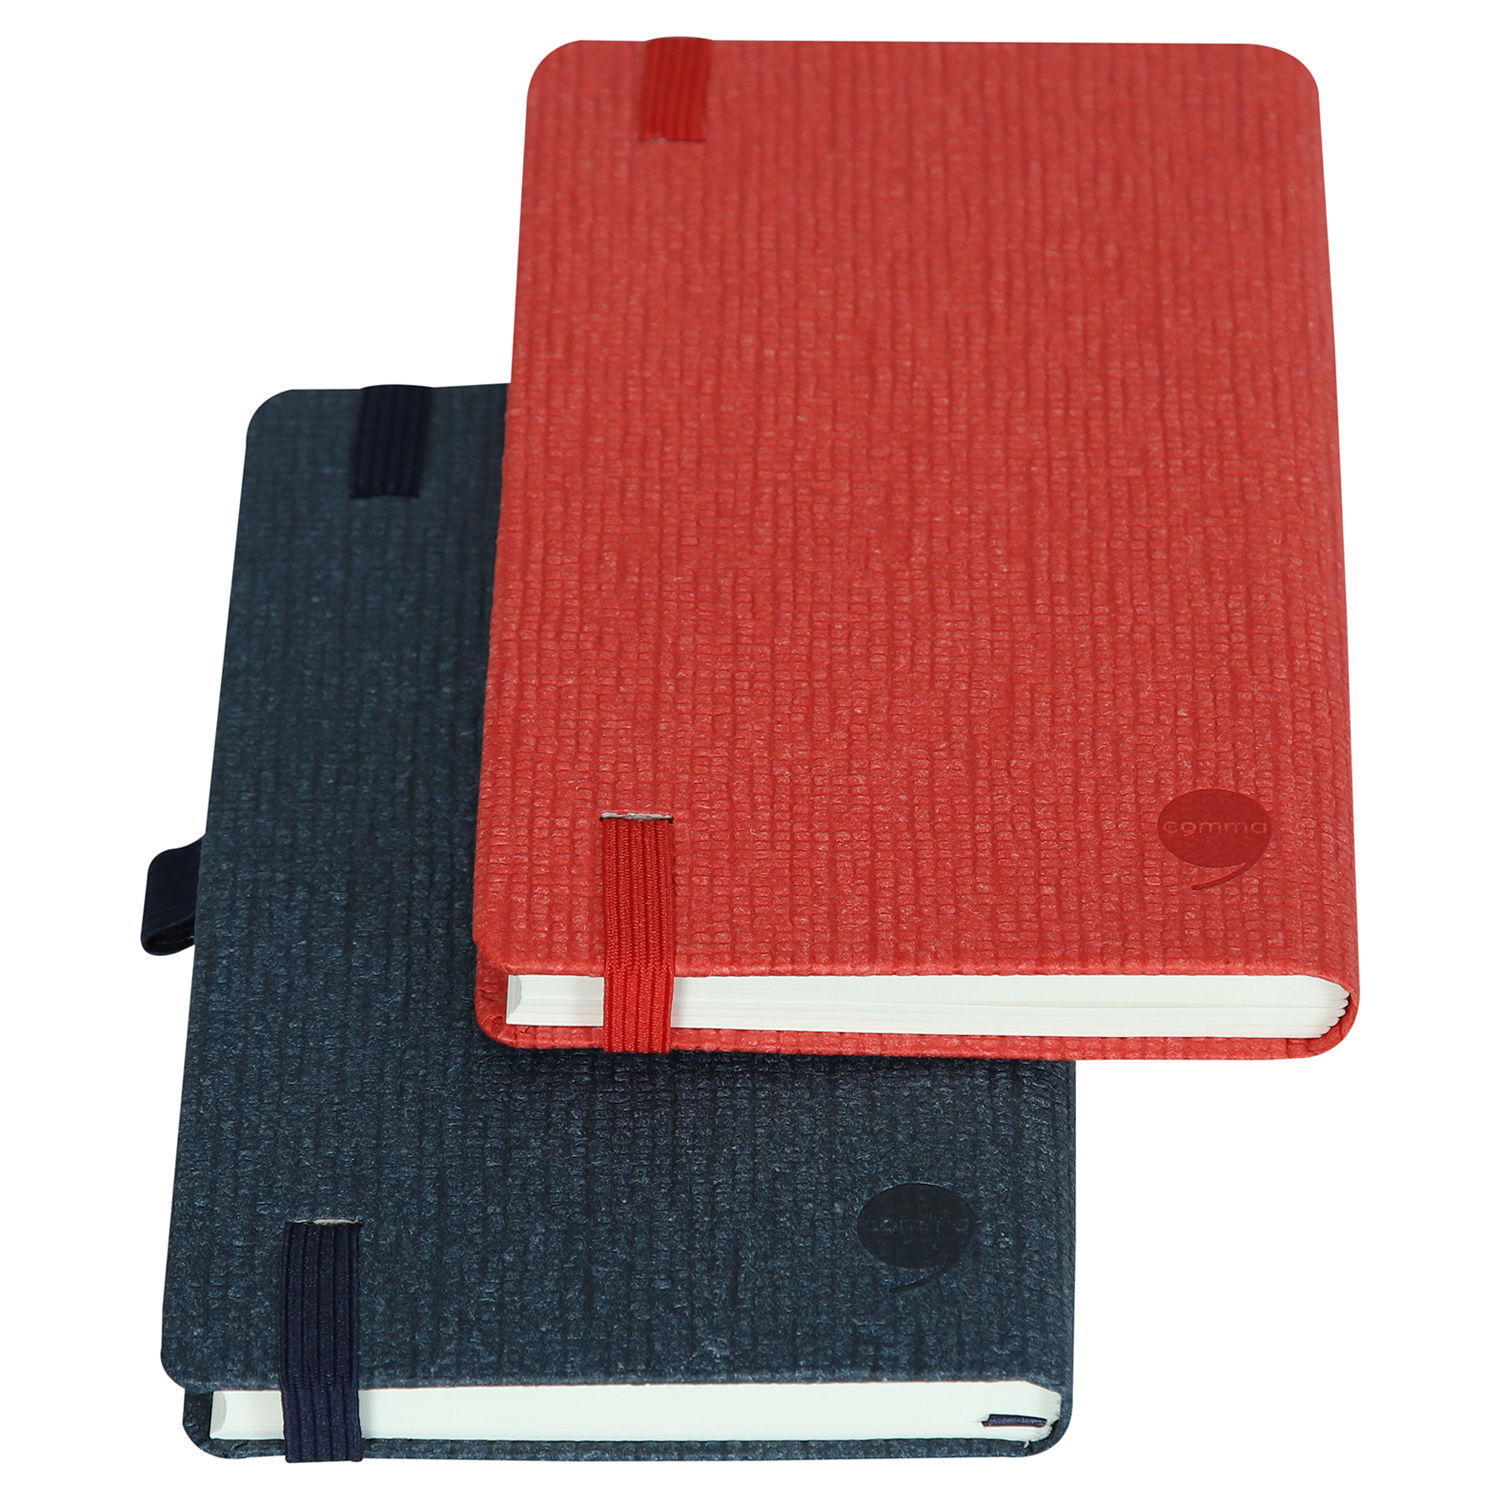 Comma Abaca - A6 Size - Hard Bound Notebook (Red)